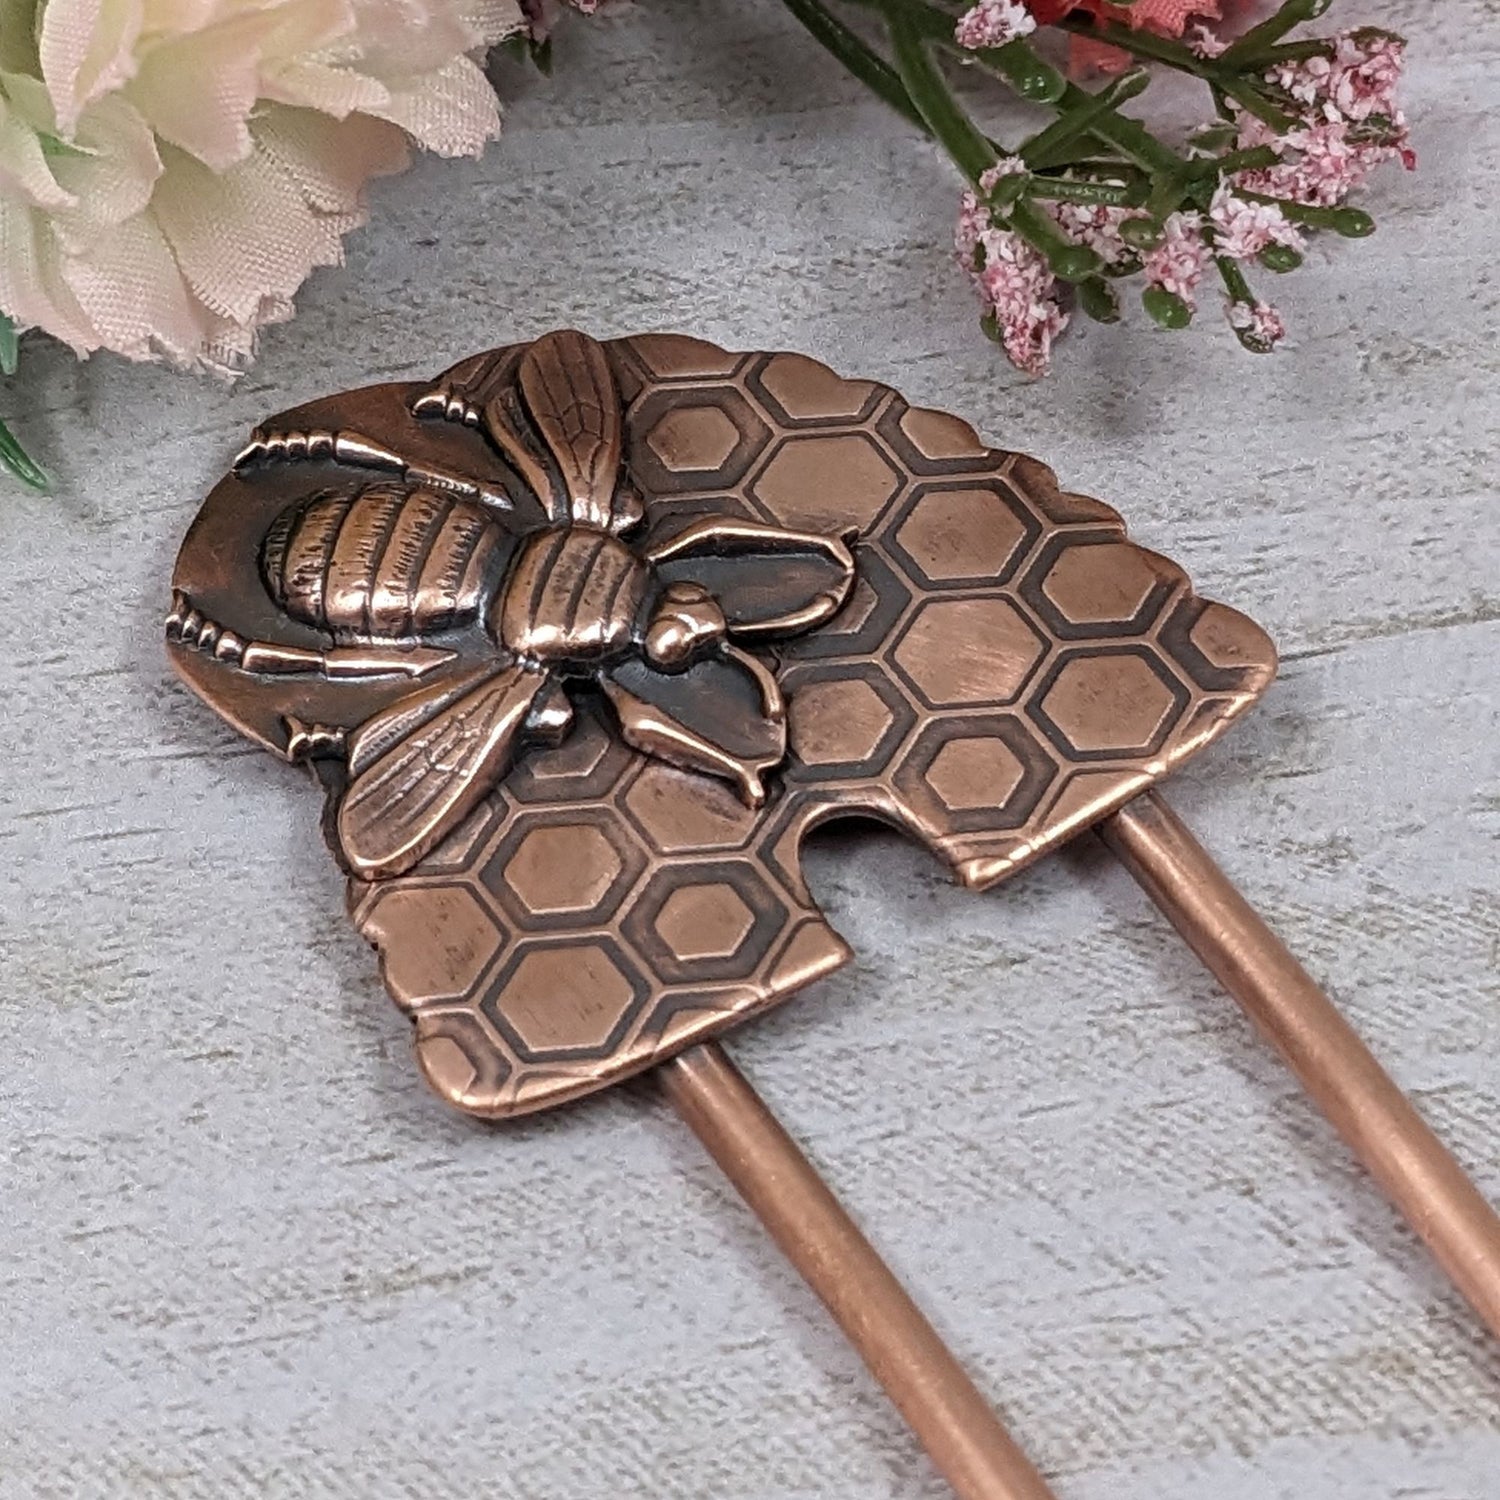 Copper Hair Fork with Bee and Beehive. The large beehive has a honeycomb design and the bee is very detailed and large enough to cover most of the hive. Recessed areas are darkened to highlight the details.